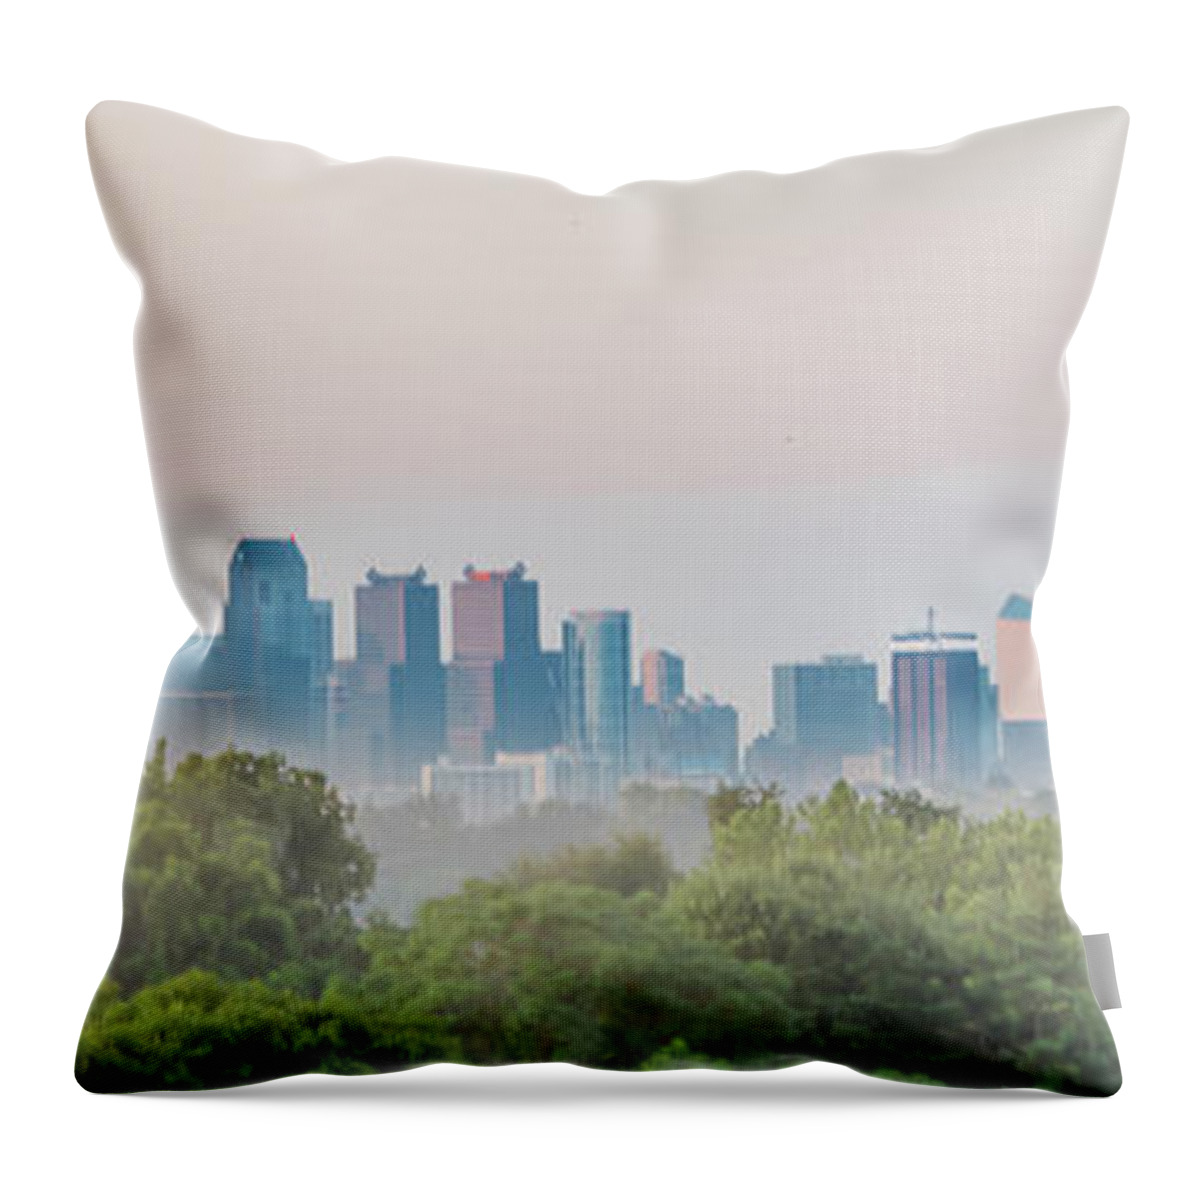 Cityscape Throw Pillow featuring the photograph Cityscape at Misty Sunrise Philadelphia - Panorama by Bill Cannon